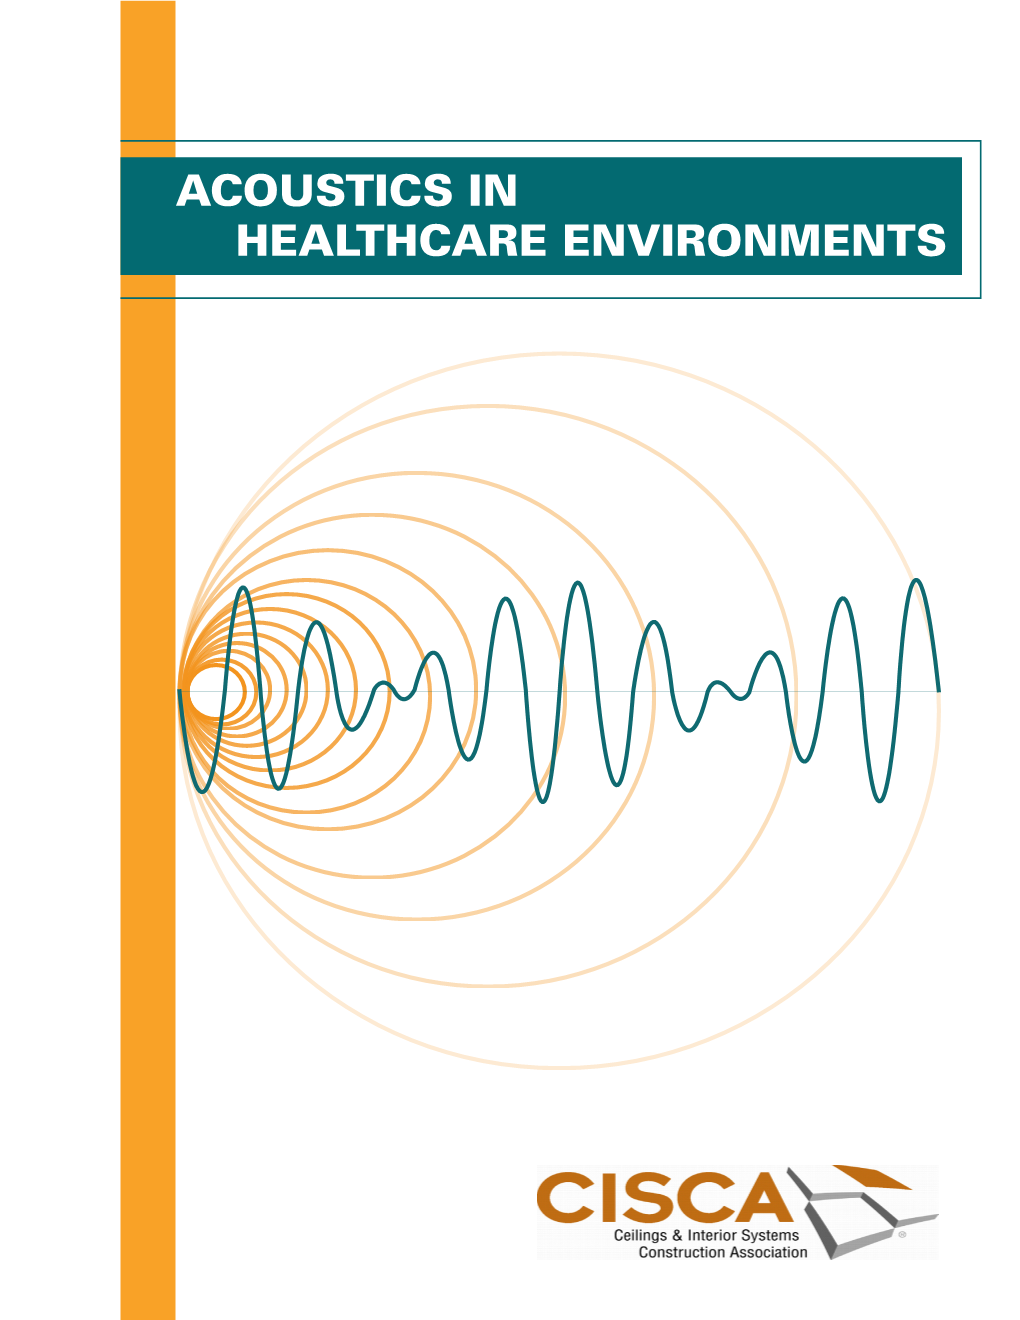 Acoustics in Healthcare Environments Introduction